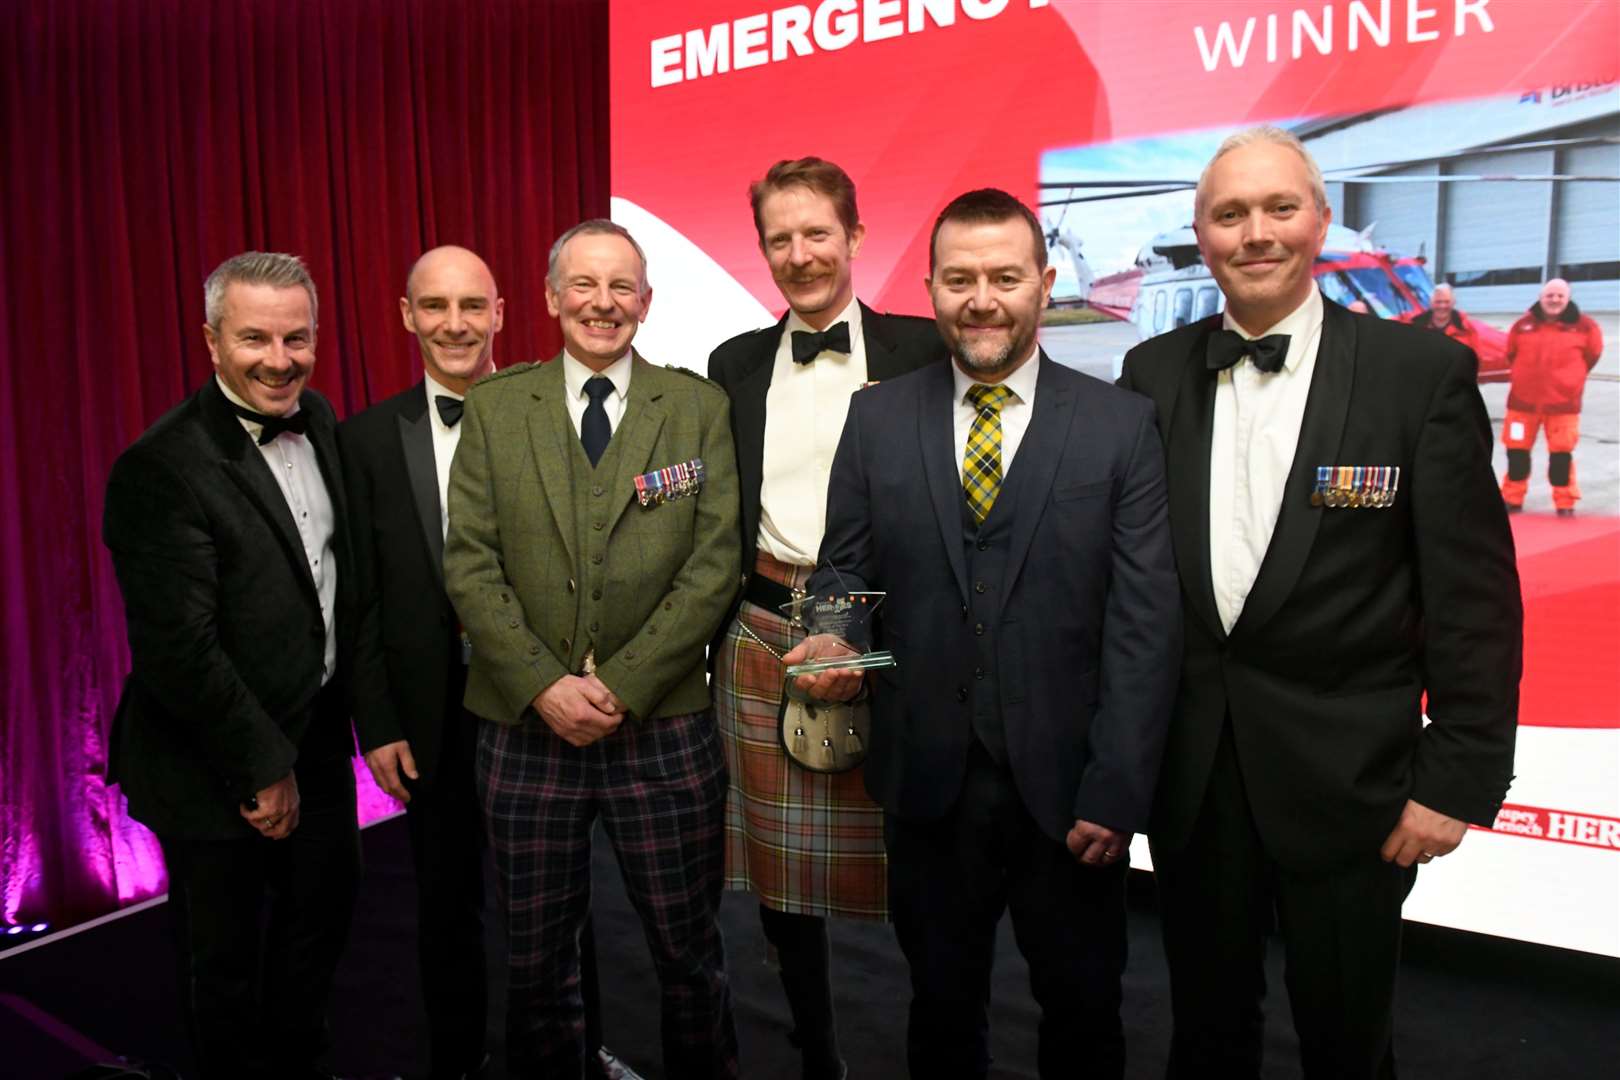 Rescue 151 won the Emergency Services or Armed Forces Award. Award presented by Robert Thorburn of Openreach. Picture: James Mackenzie.